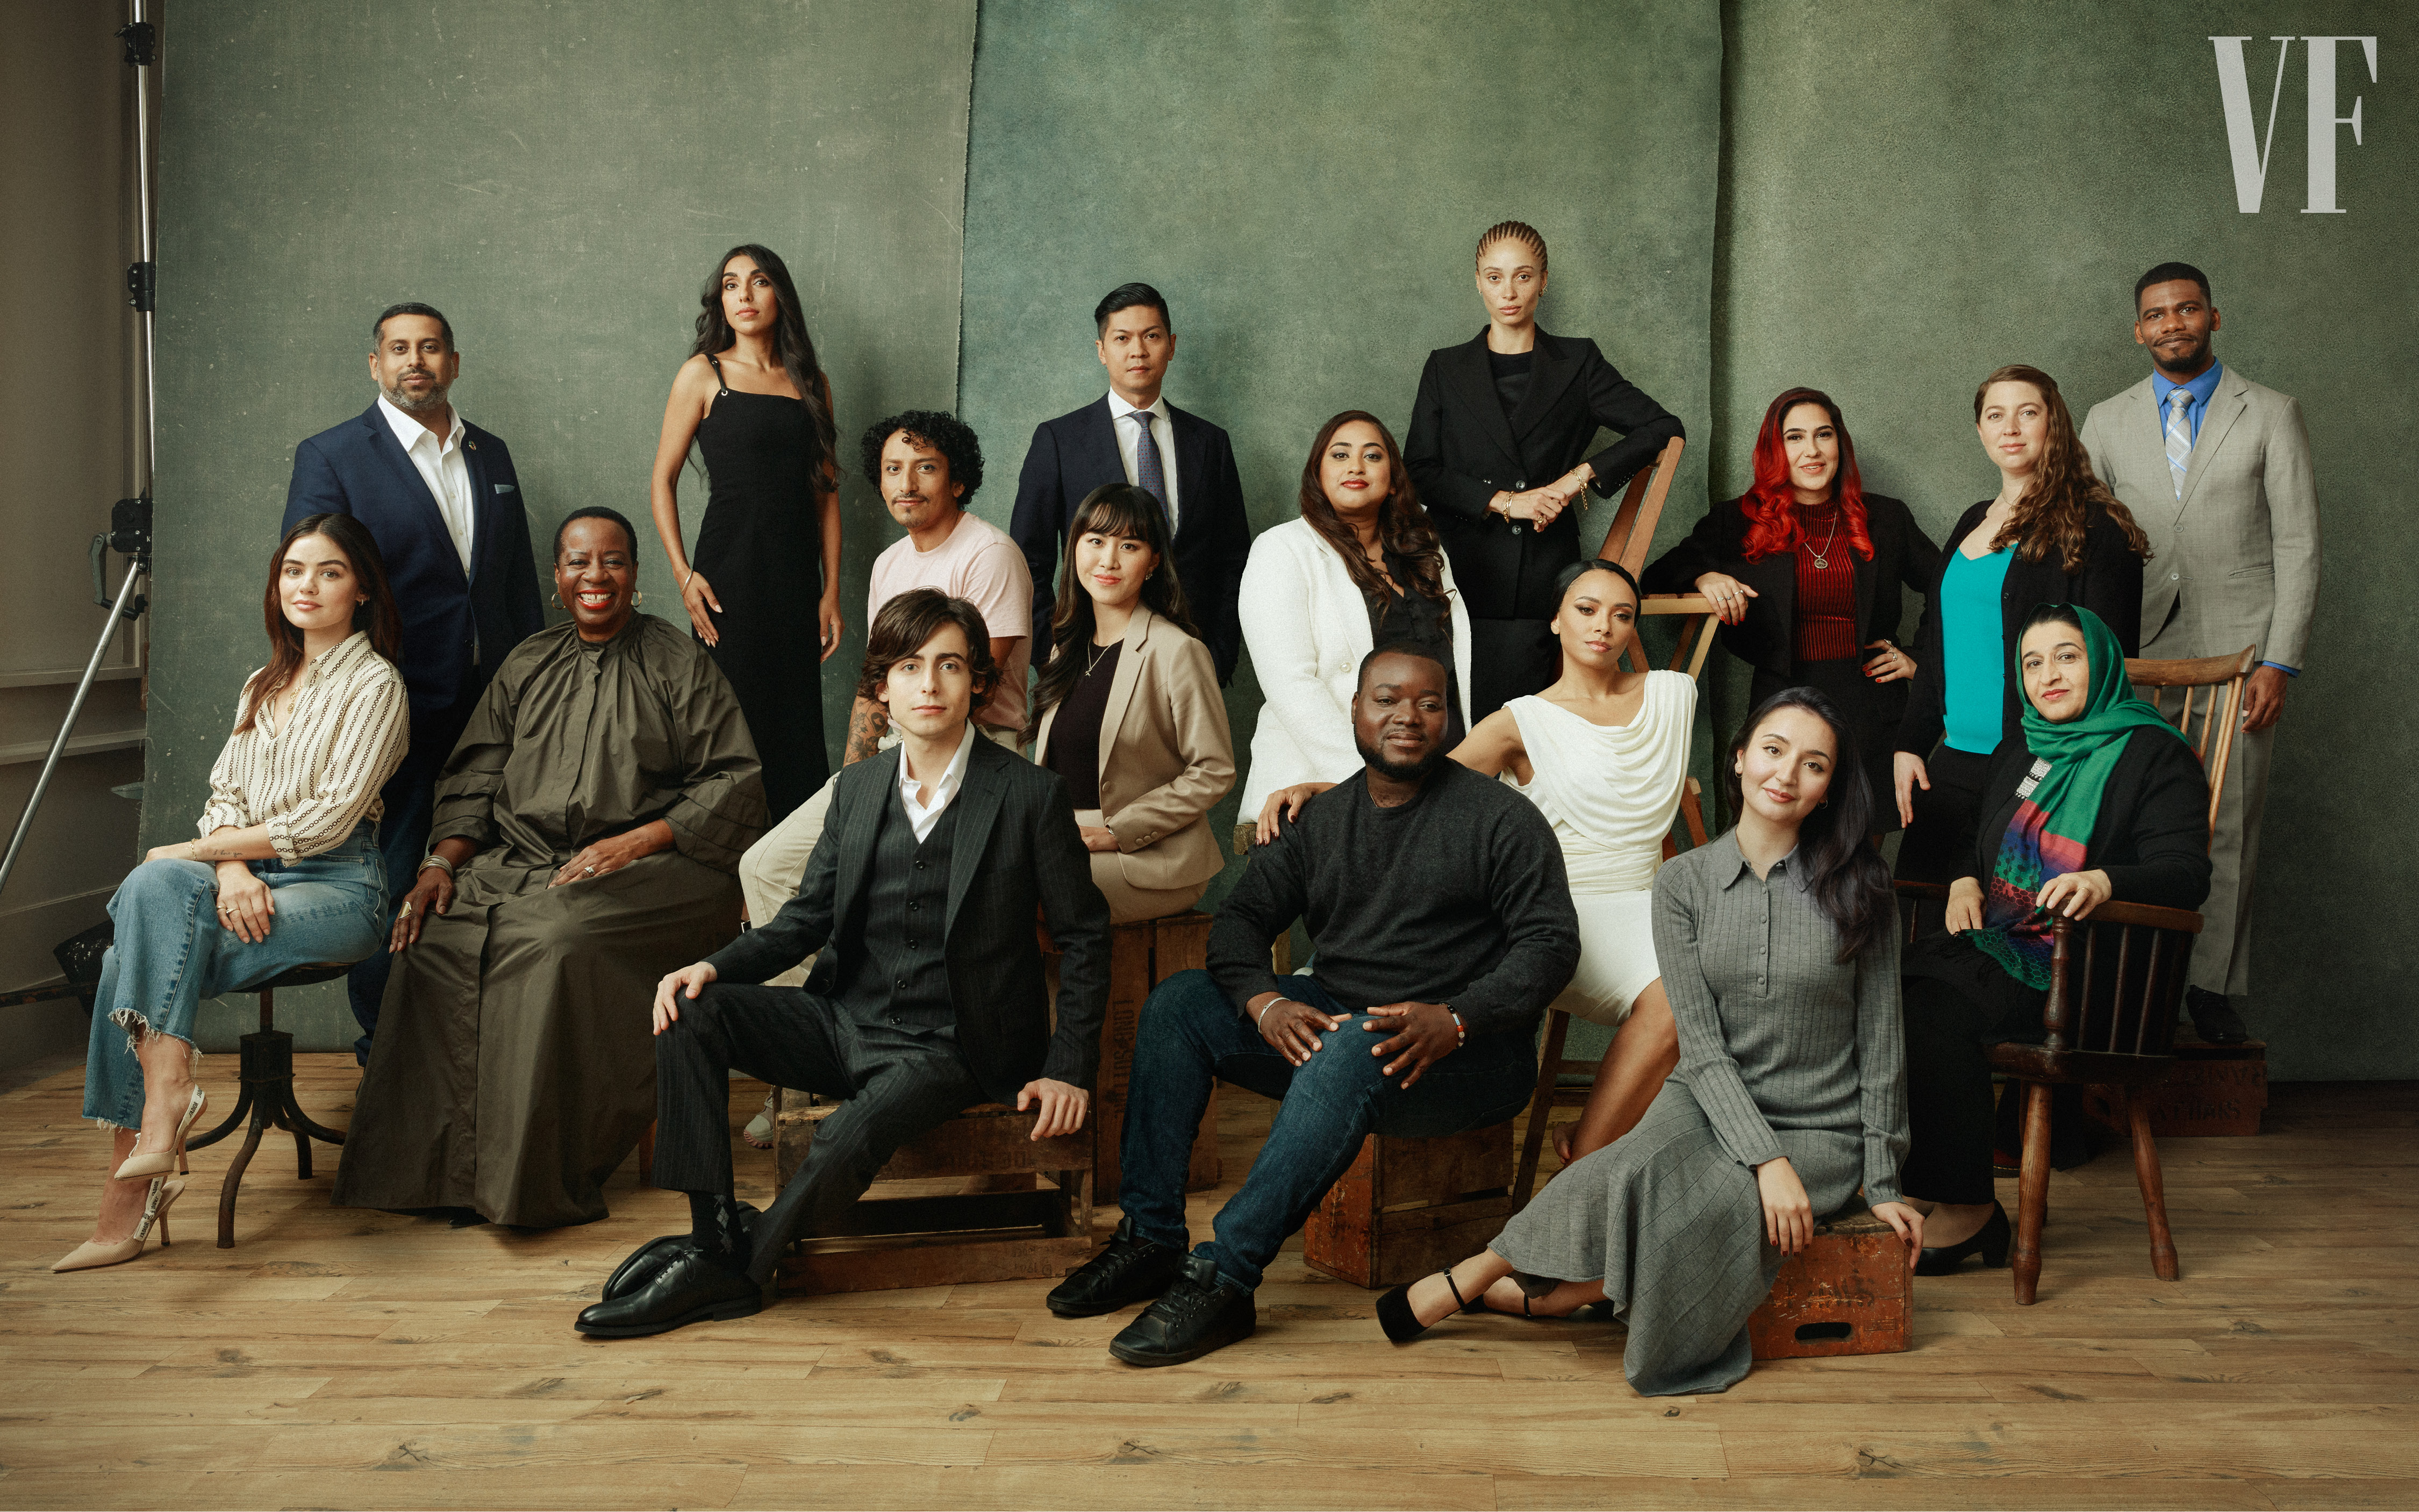 Vanity Fair Global Goals List full photo with One Young World Counsellors and Ambassadors